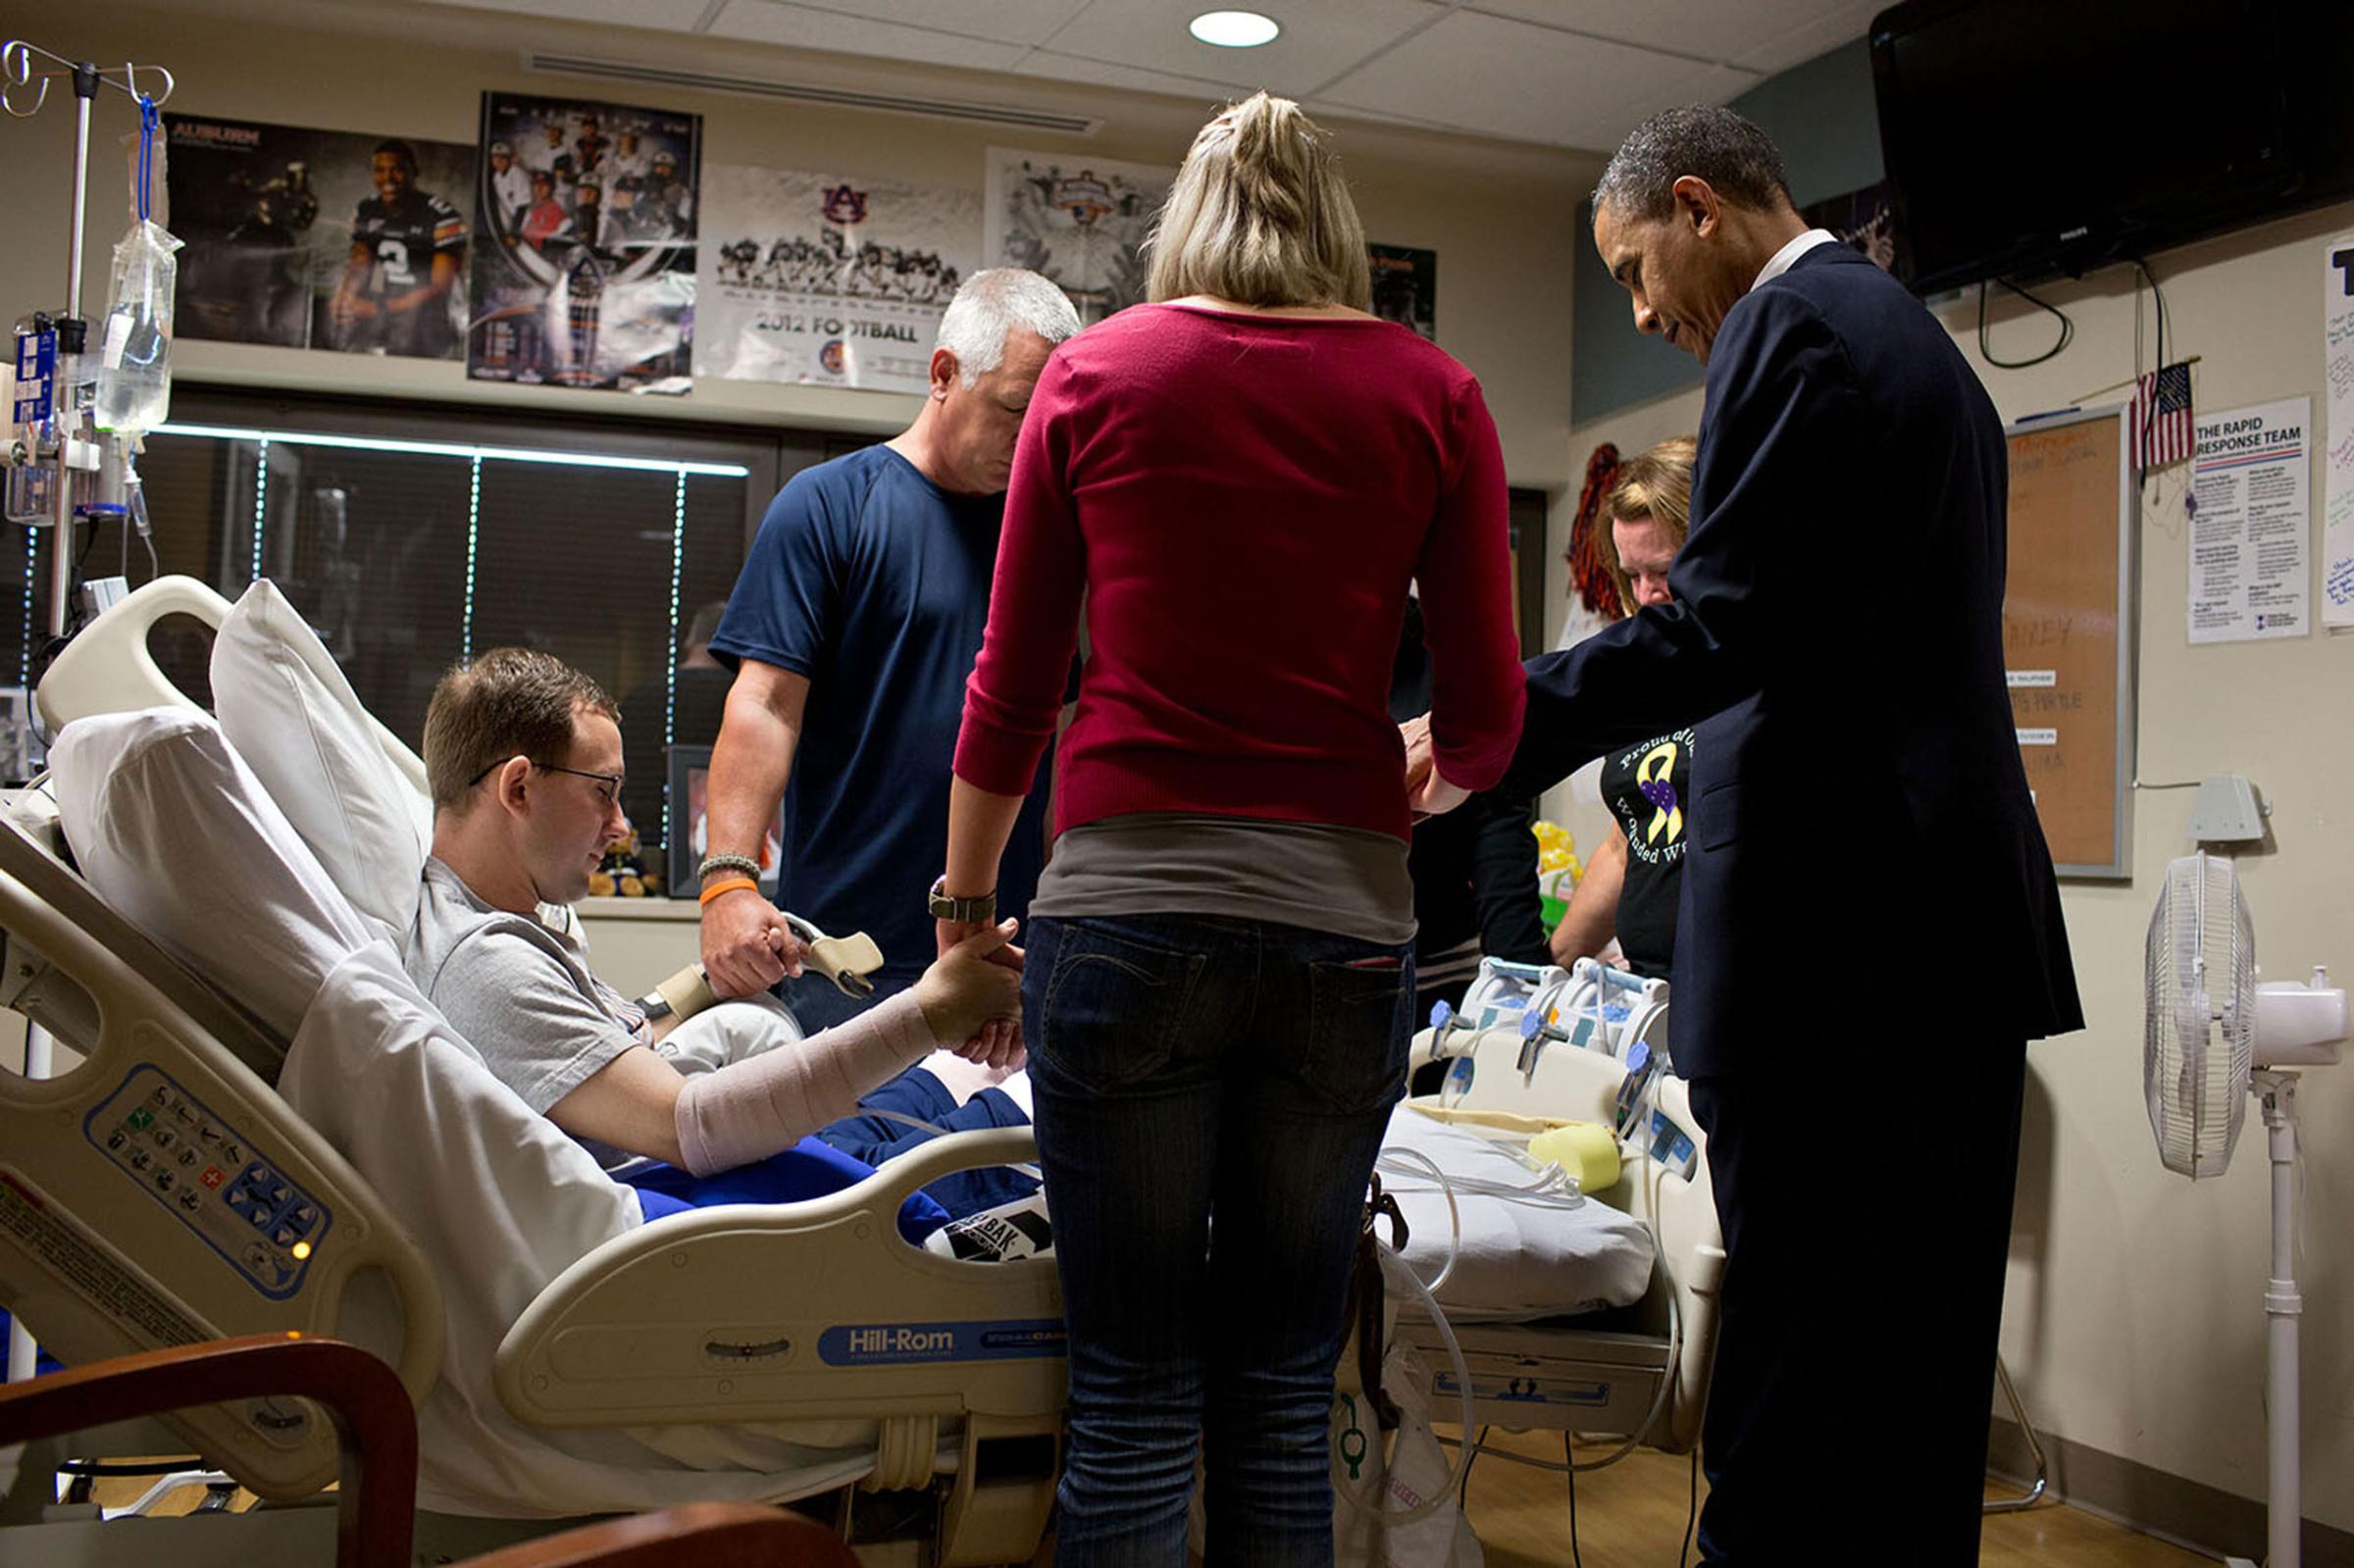 "The President prays with a wounded service member and his family during a visit to Walter Reed National Military Medical Center in Bethesda, Md. The President likes to make a few trips a year to Walter Reed to visit wounded warriors and their families,"June 28, 2012.